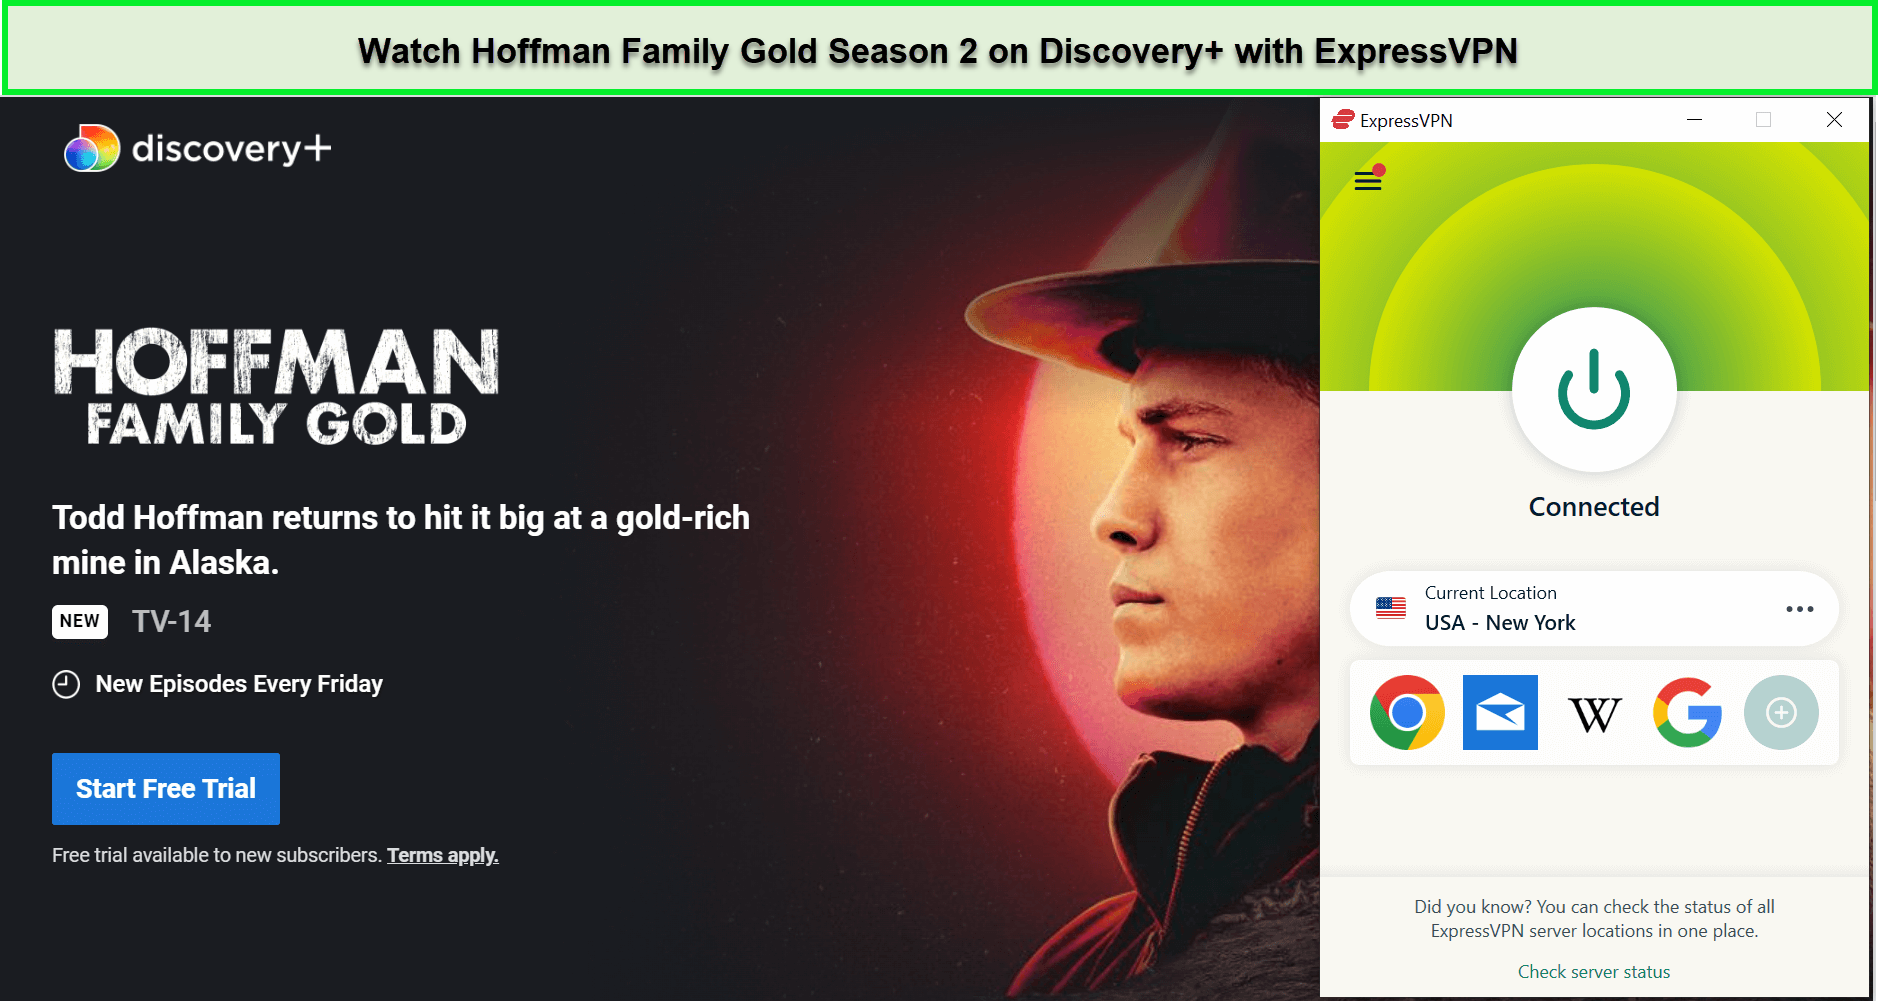 Watch-Hoffman-Family-Gold-Season-2-outside-us-on-Discovery-with-ExpressVPN.